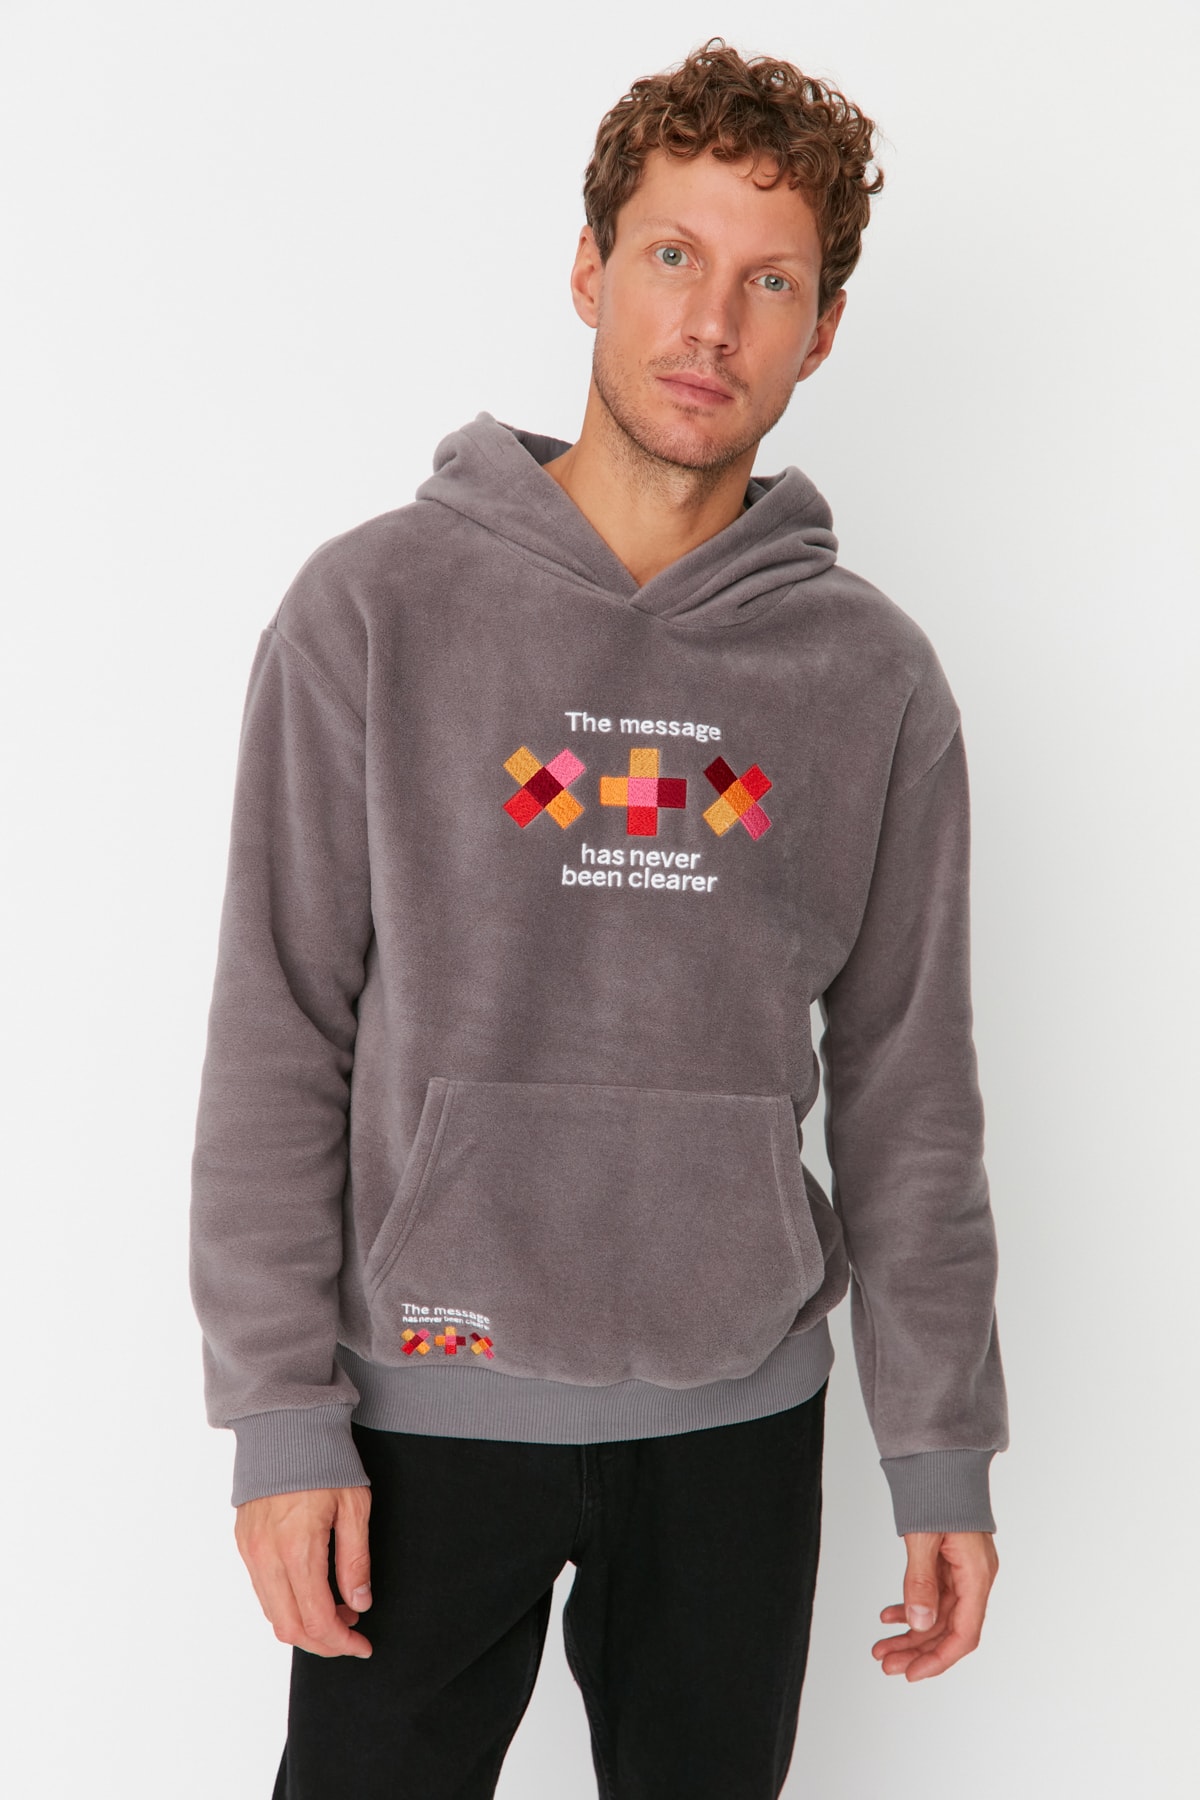 Trendyol Anthracite Men's Relaxed Fit Hooded Embroidery Kangaroo Sweatshirt with Pocket. Warm Thick Fleece/Plush.